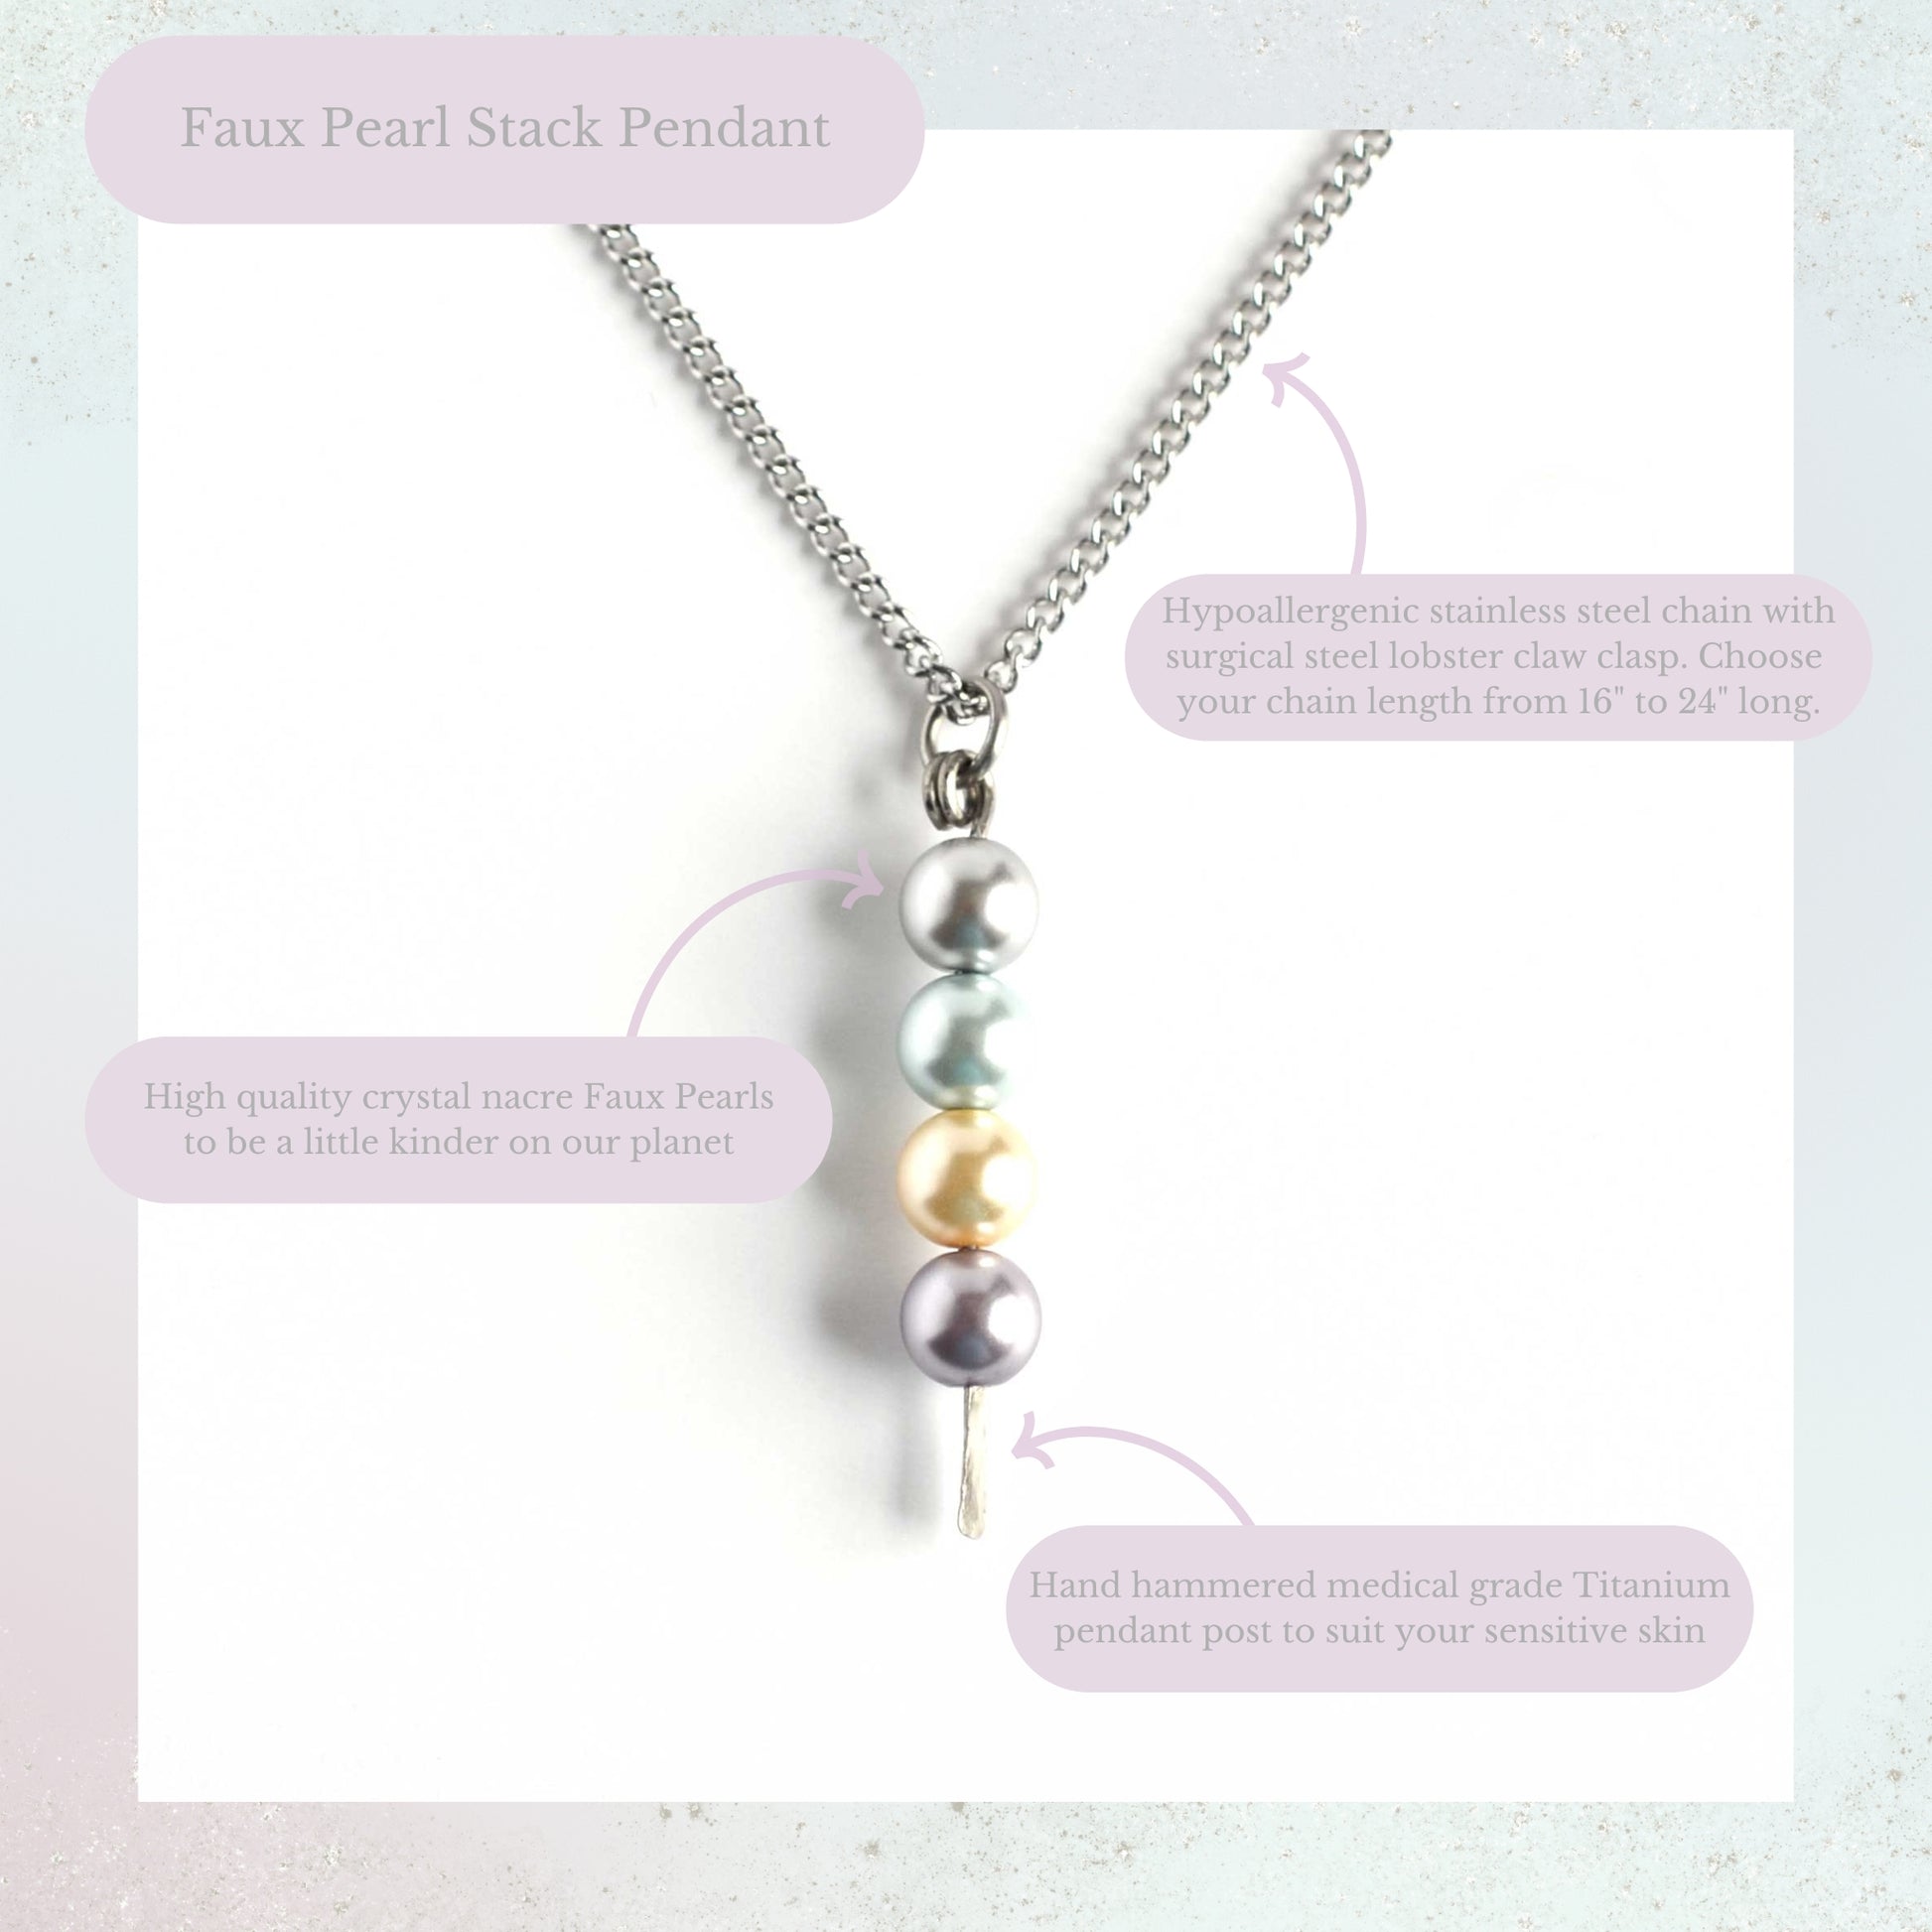 Faux pearl stack pendant information graphic